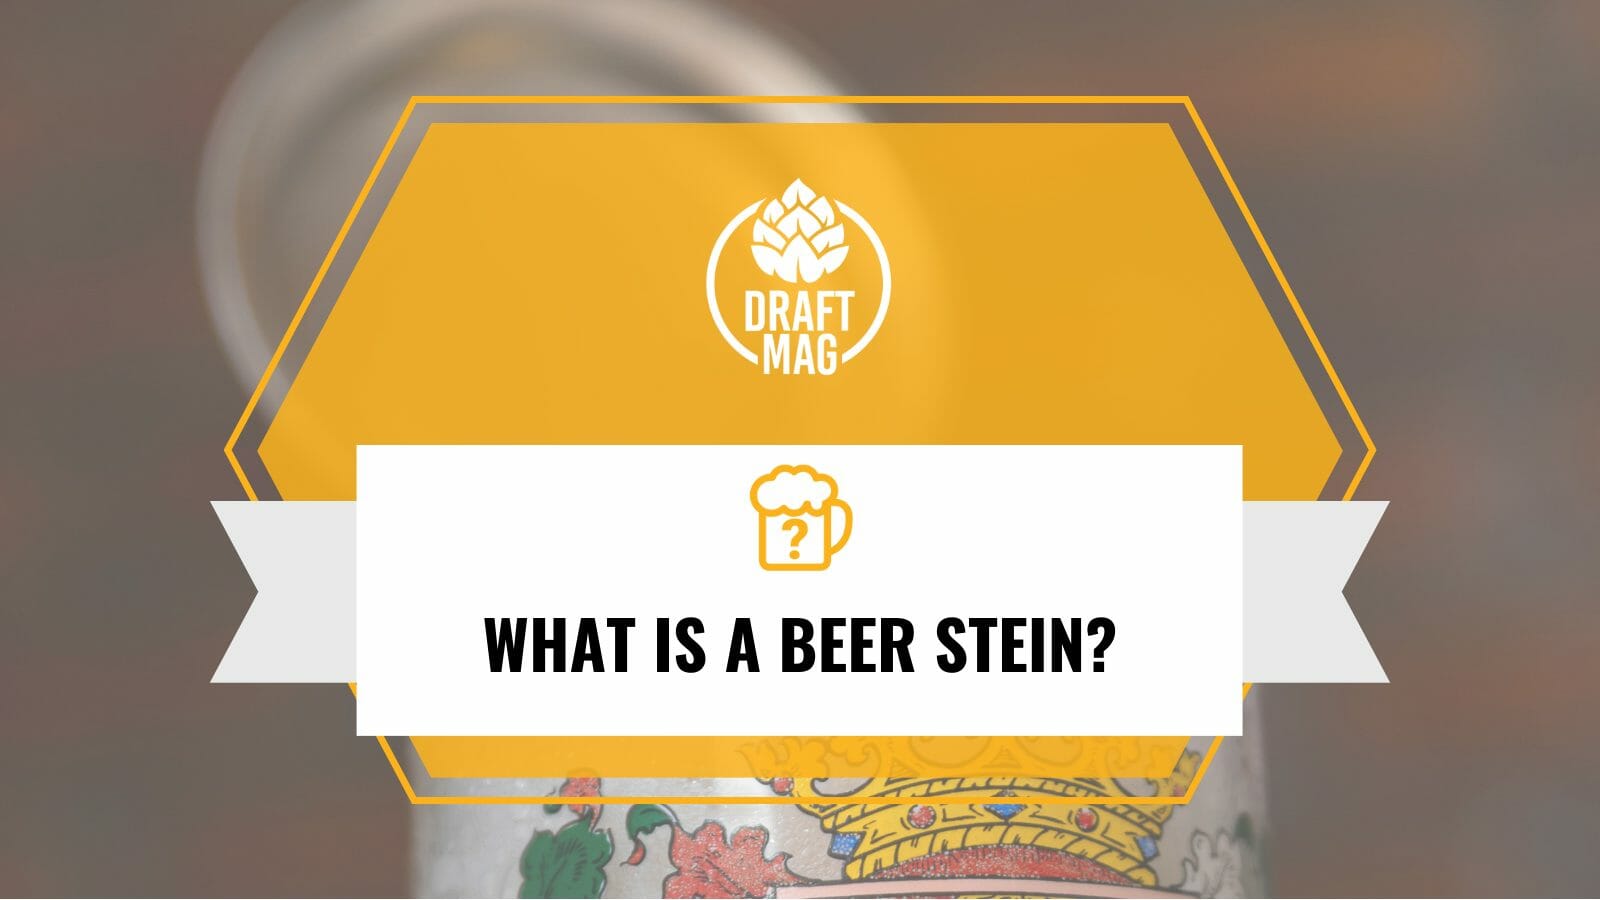 What is a beer stein